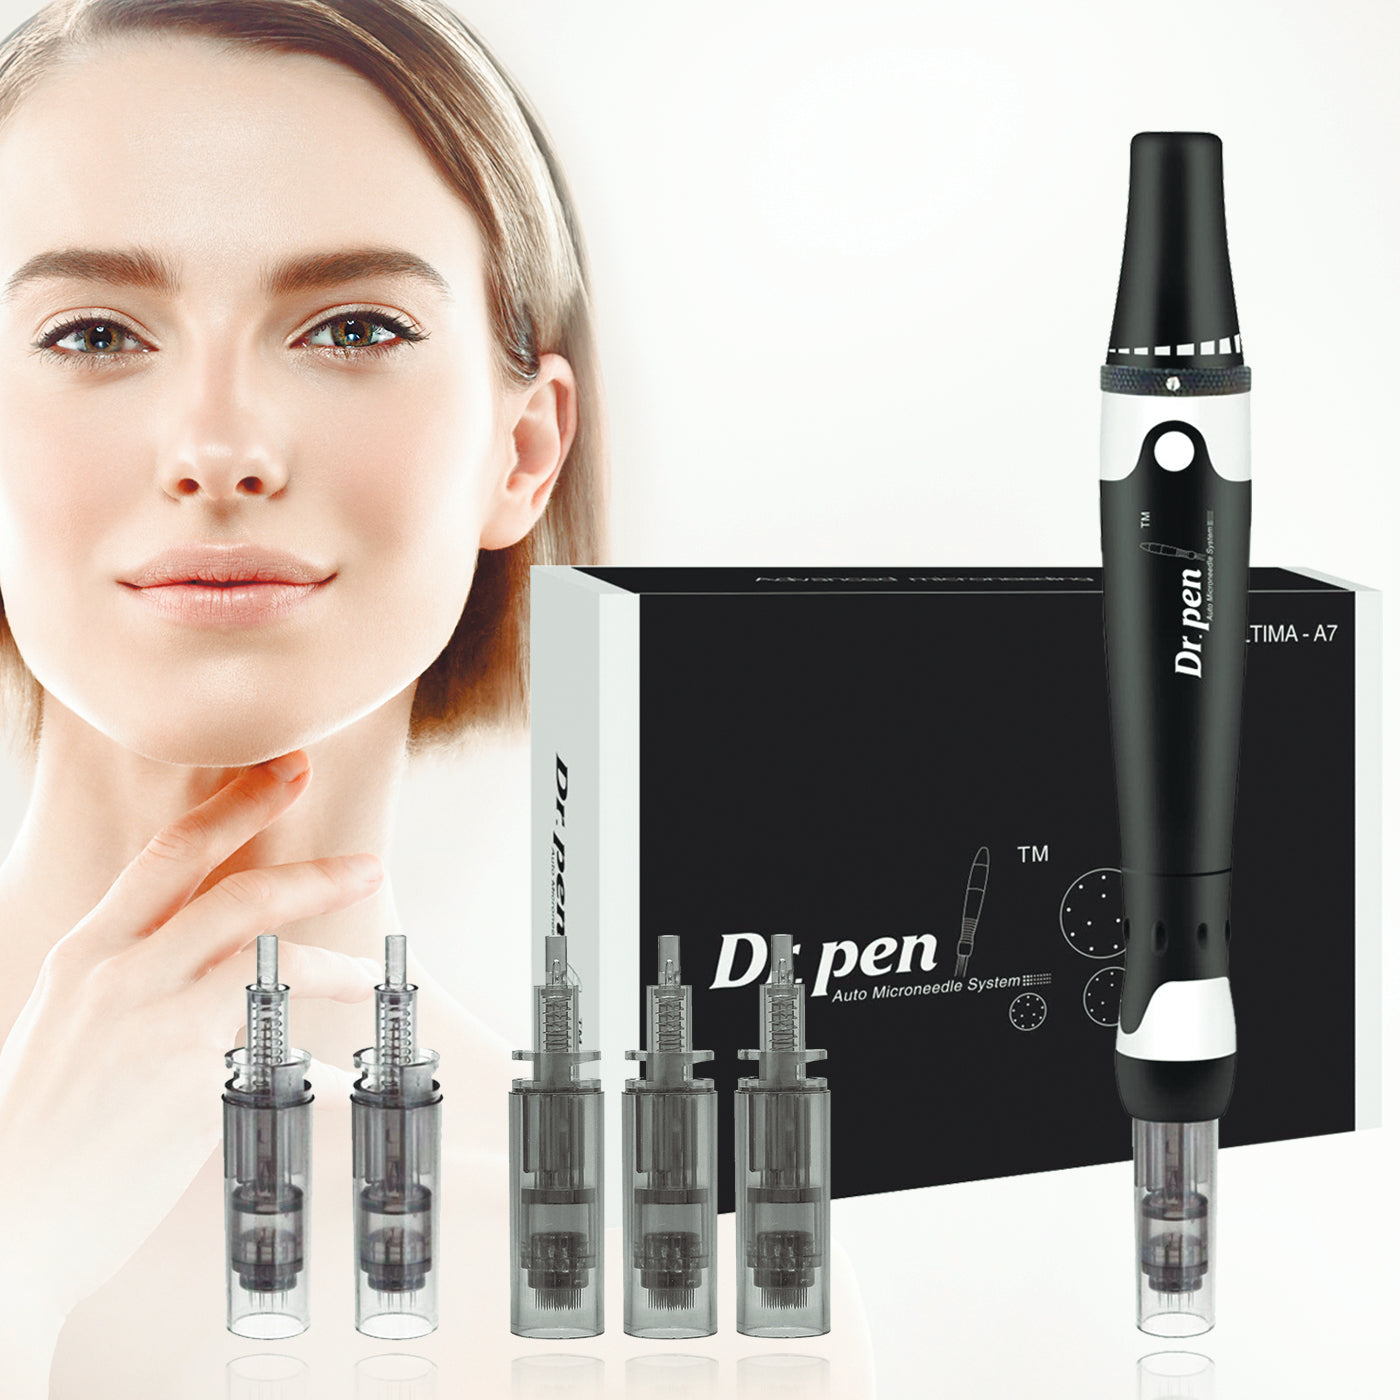 Dr. Pen Ultima A7 Professional Kit - Authentic Multi-Function Electric Wired Beauty Pen - Skin Care Kit for Face and Body - 12pins x2 (0.25mm) + 36pins x3 (0.25mm) Cartridges